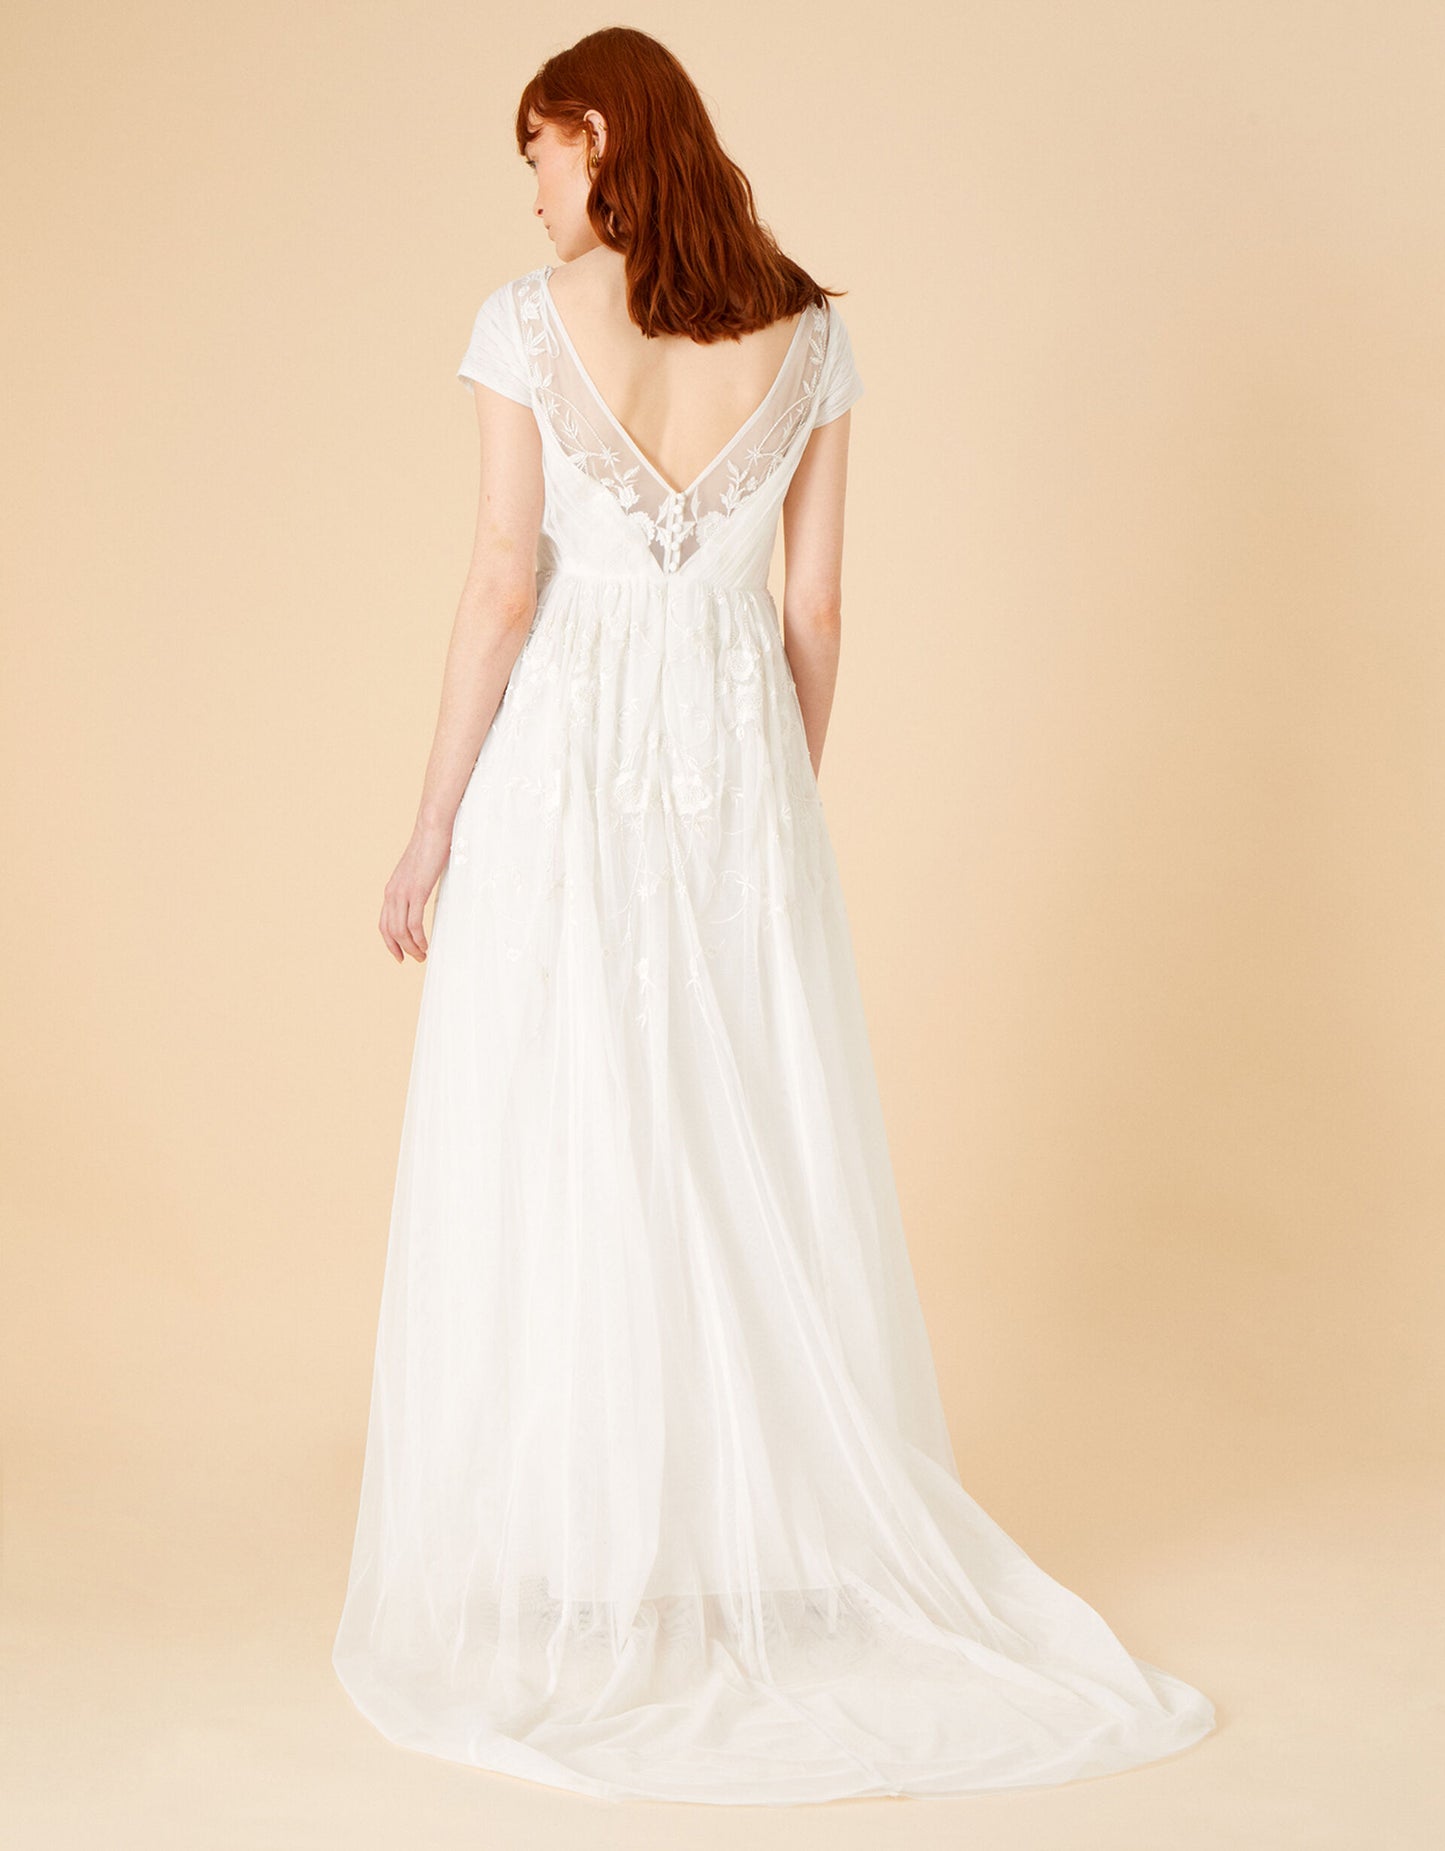 Sylvia embroidered bridal dress in recycled polyester ivory